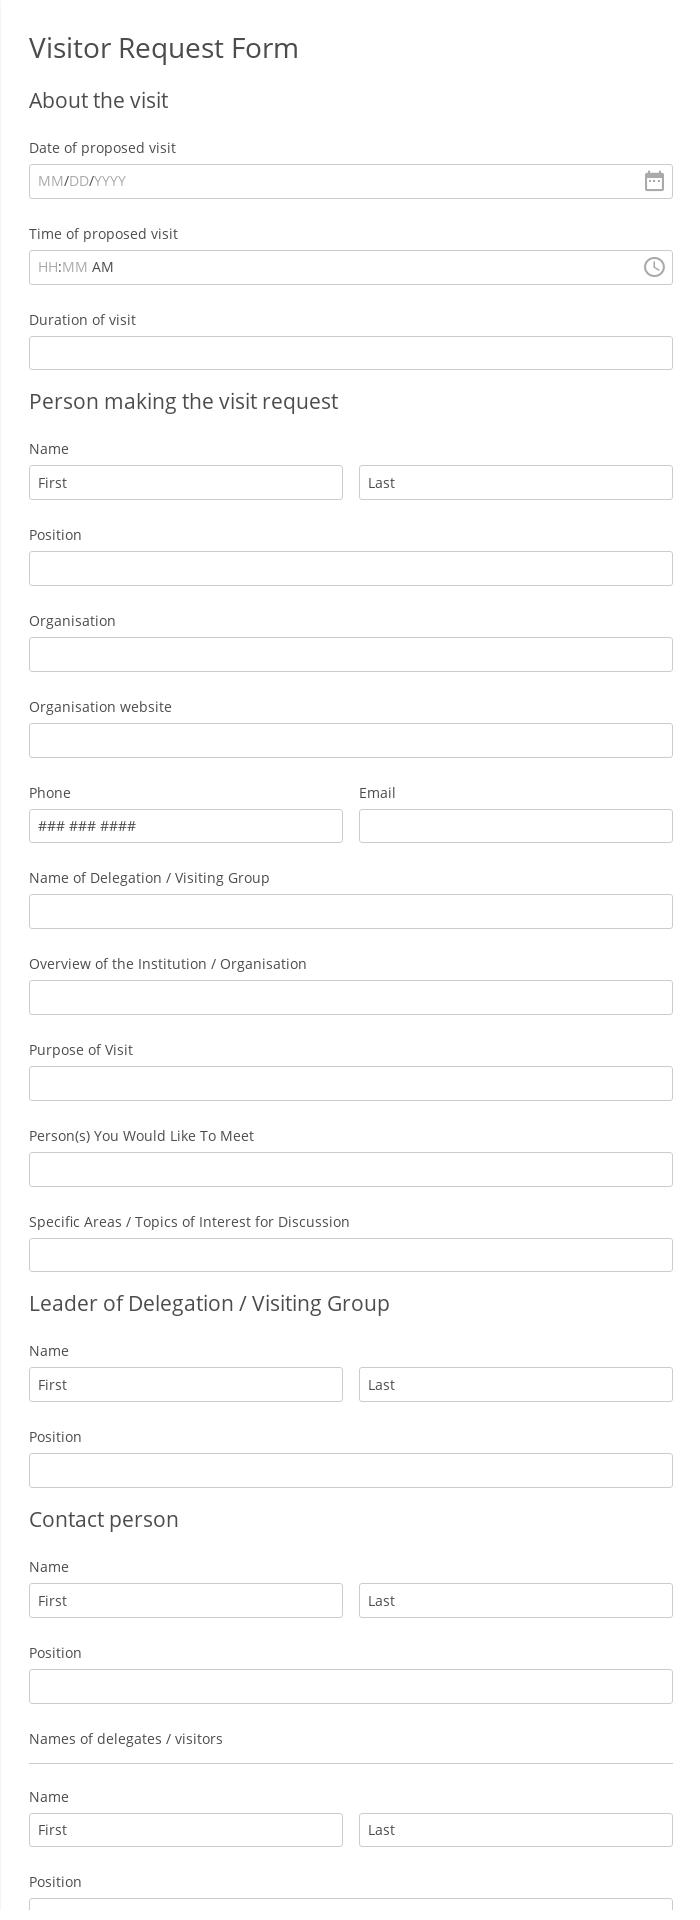 Visitor Request Form